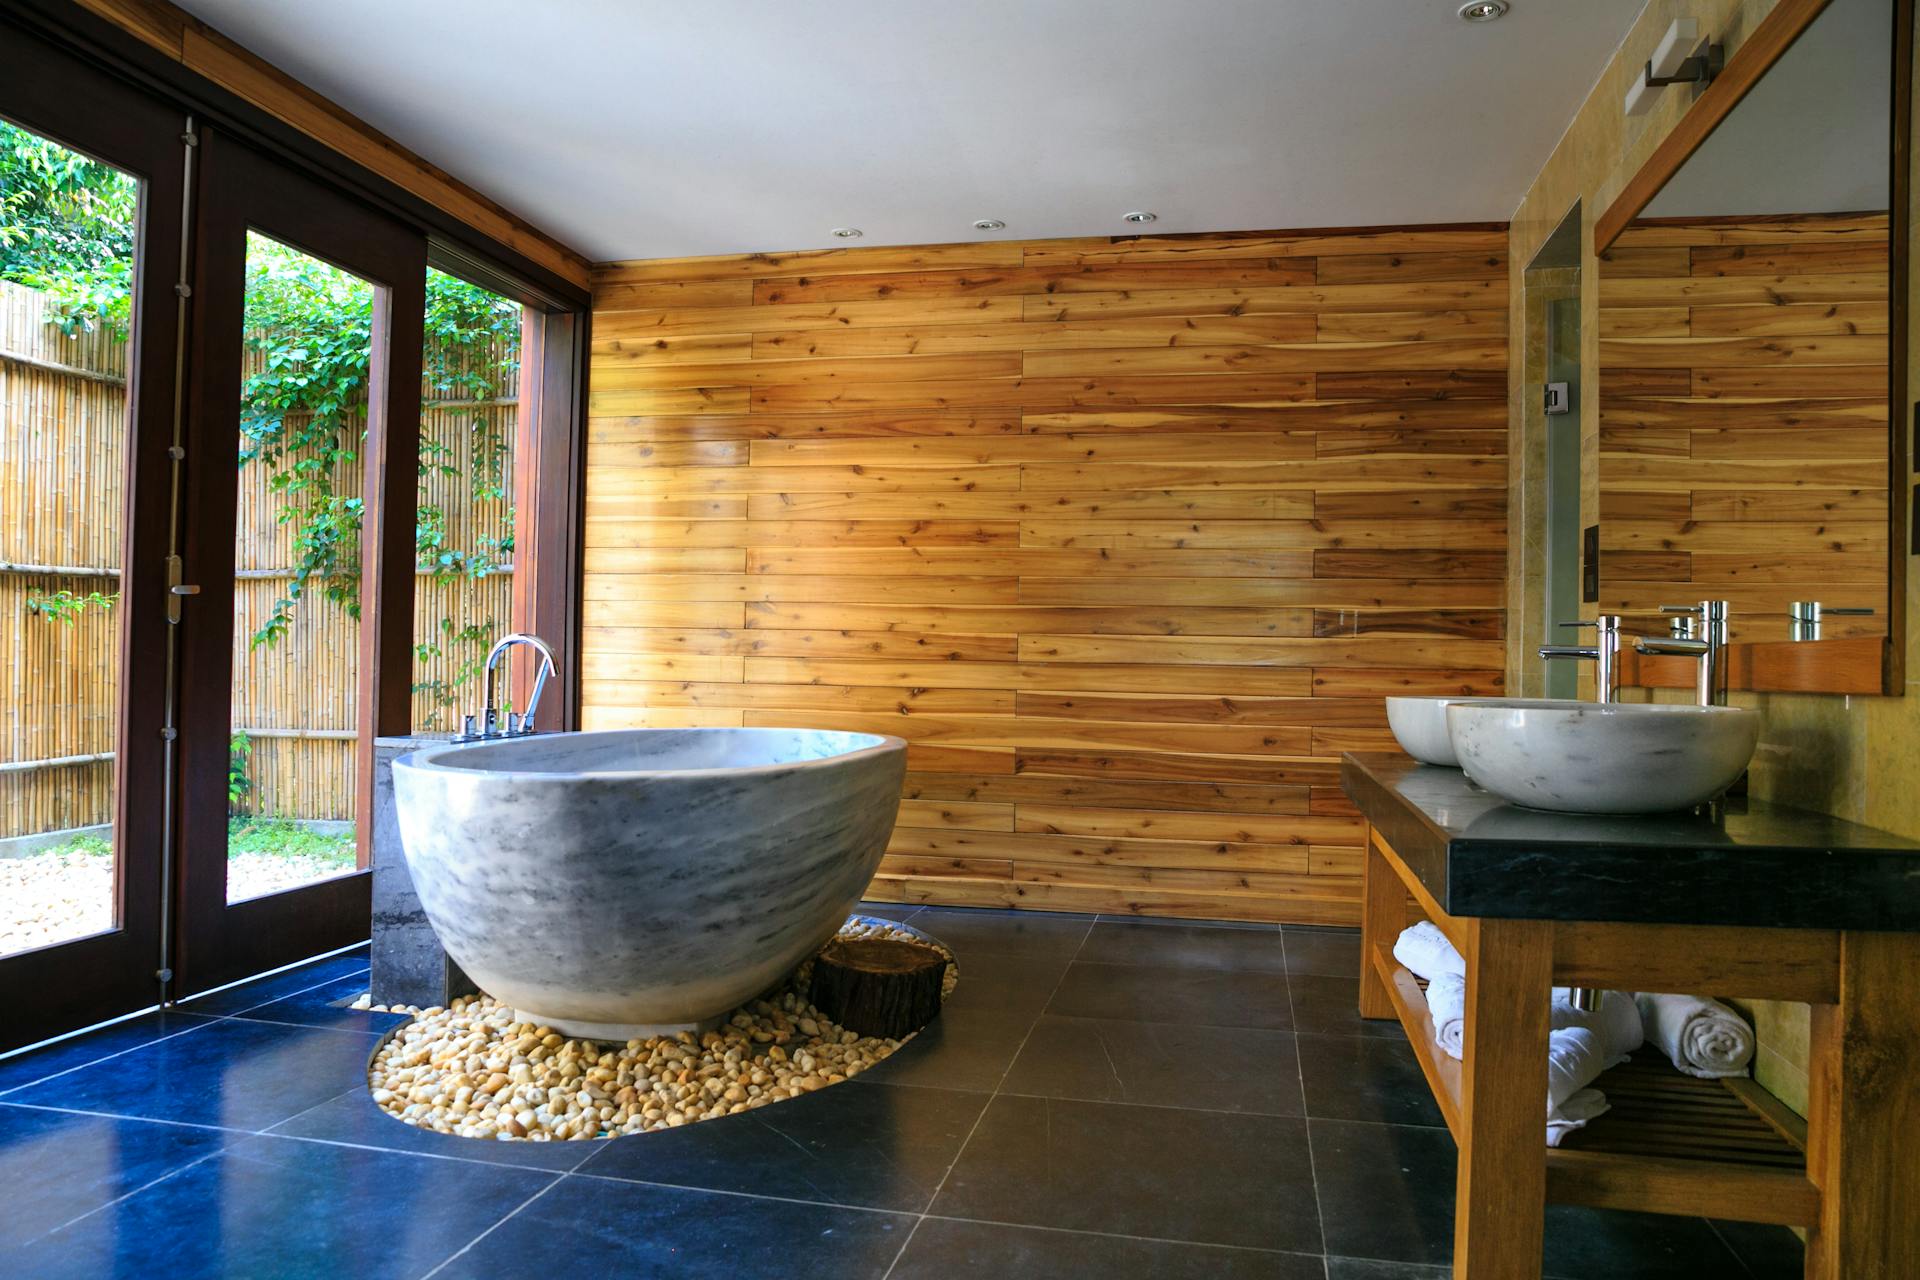 Spa-Days at Home: Ten Tips for a More Relaxing Bathroom